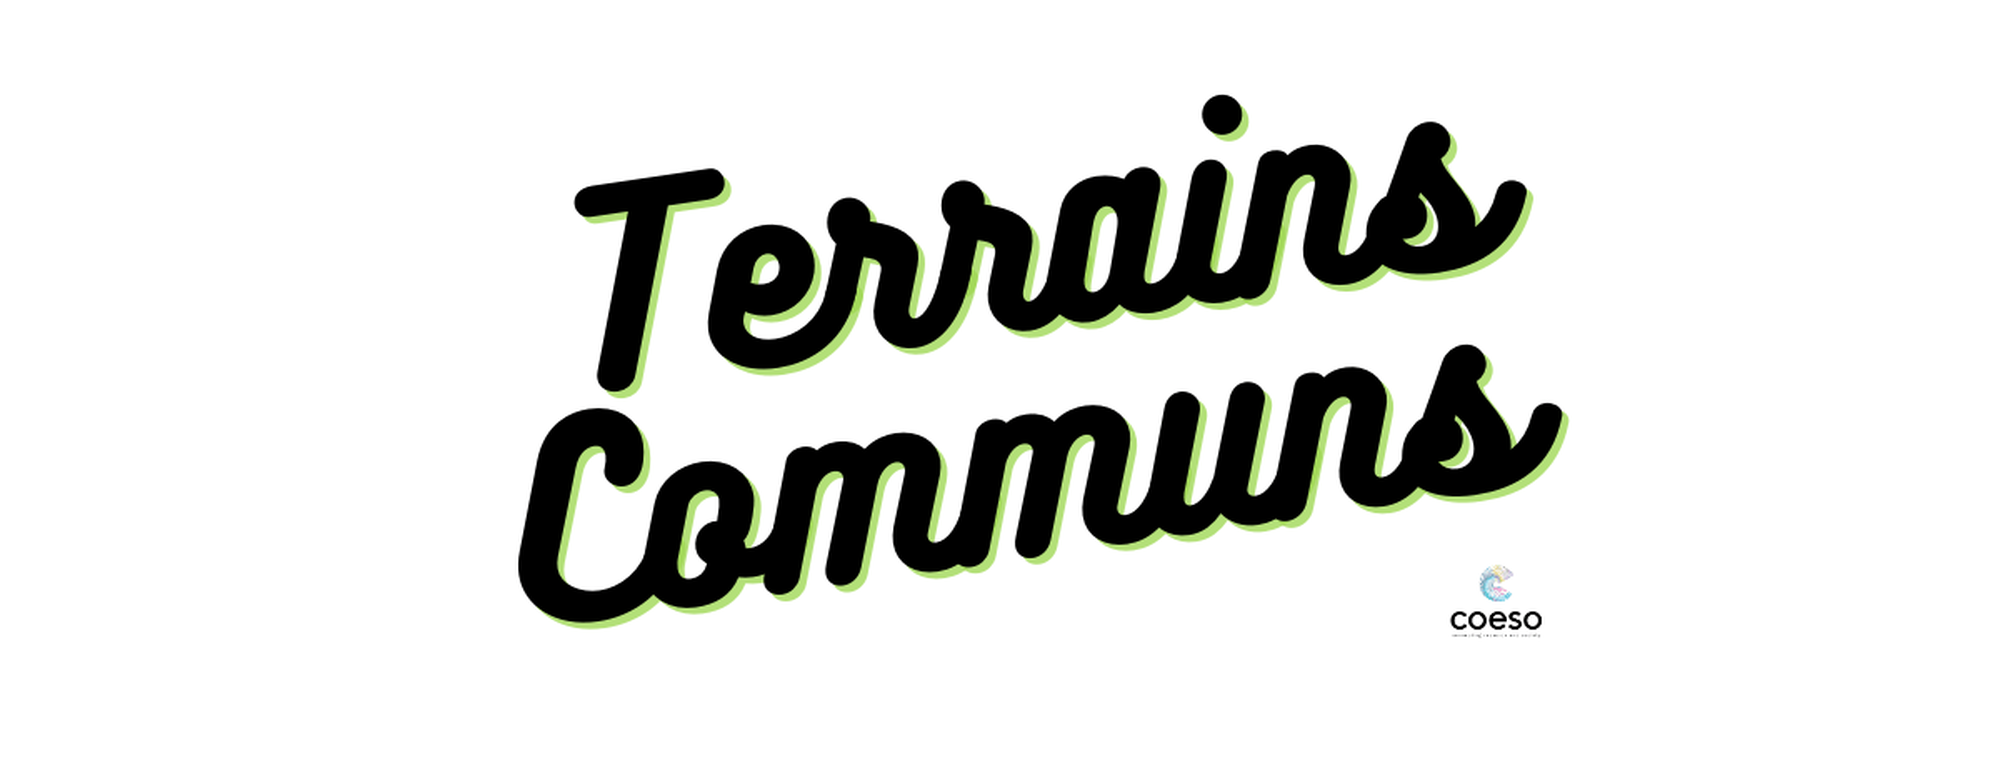 Cover picture for #Terrains Communs